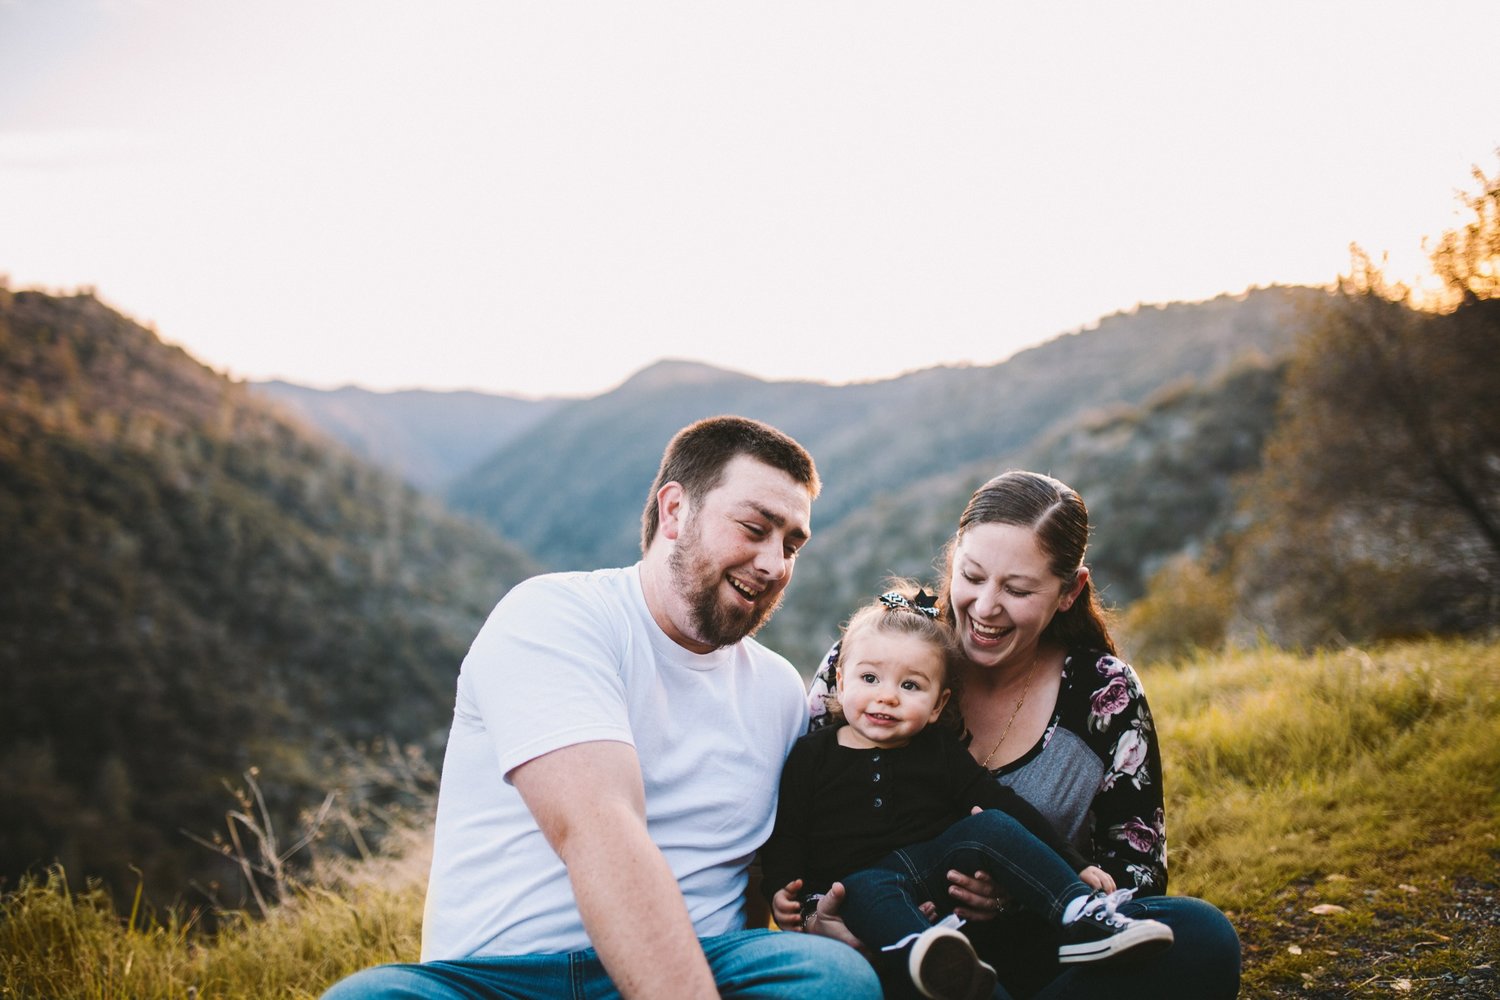 Stanislaus+Forest,+Tuolumne+County+Family+Photography+Session+49.jpg